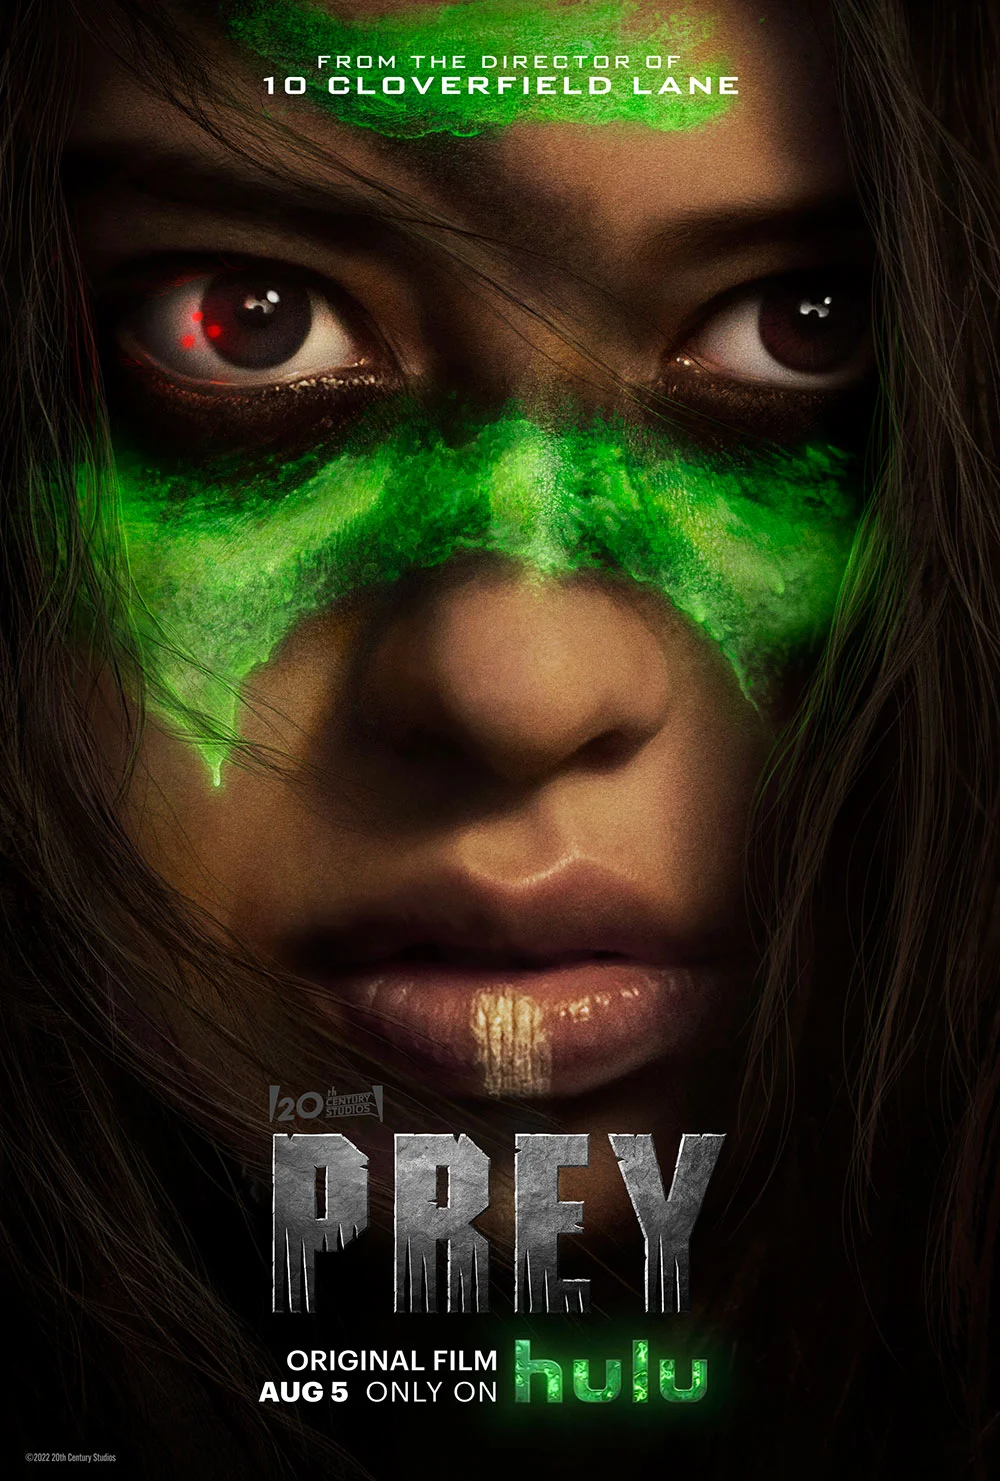 "Prey" releases Official Trailer and Poster, it will be available on Hulu on August 5